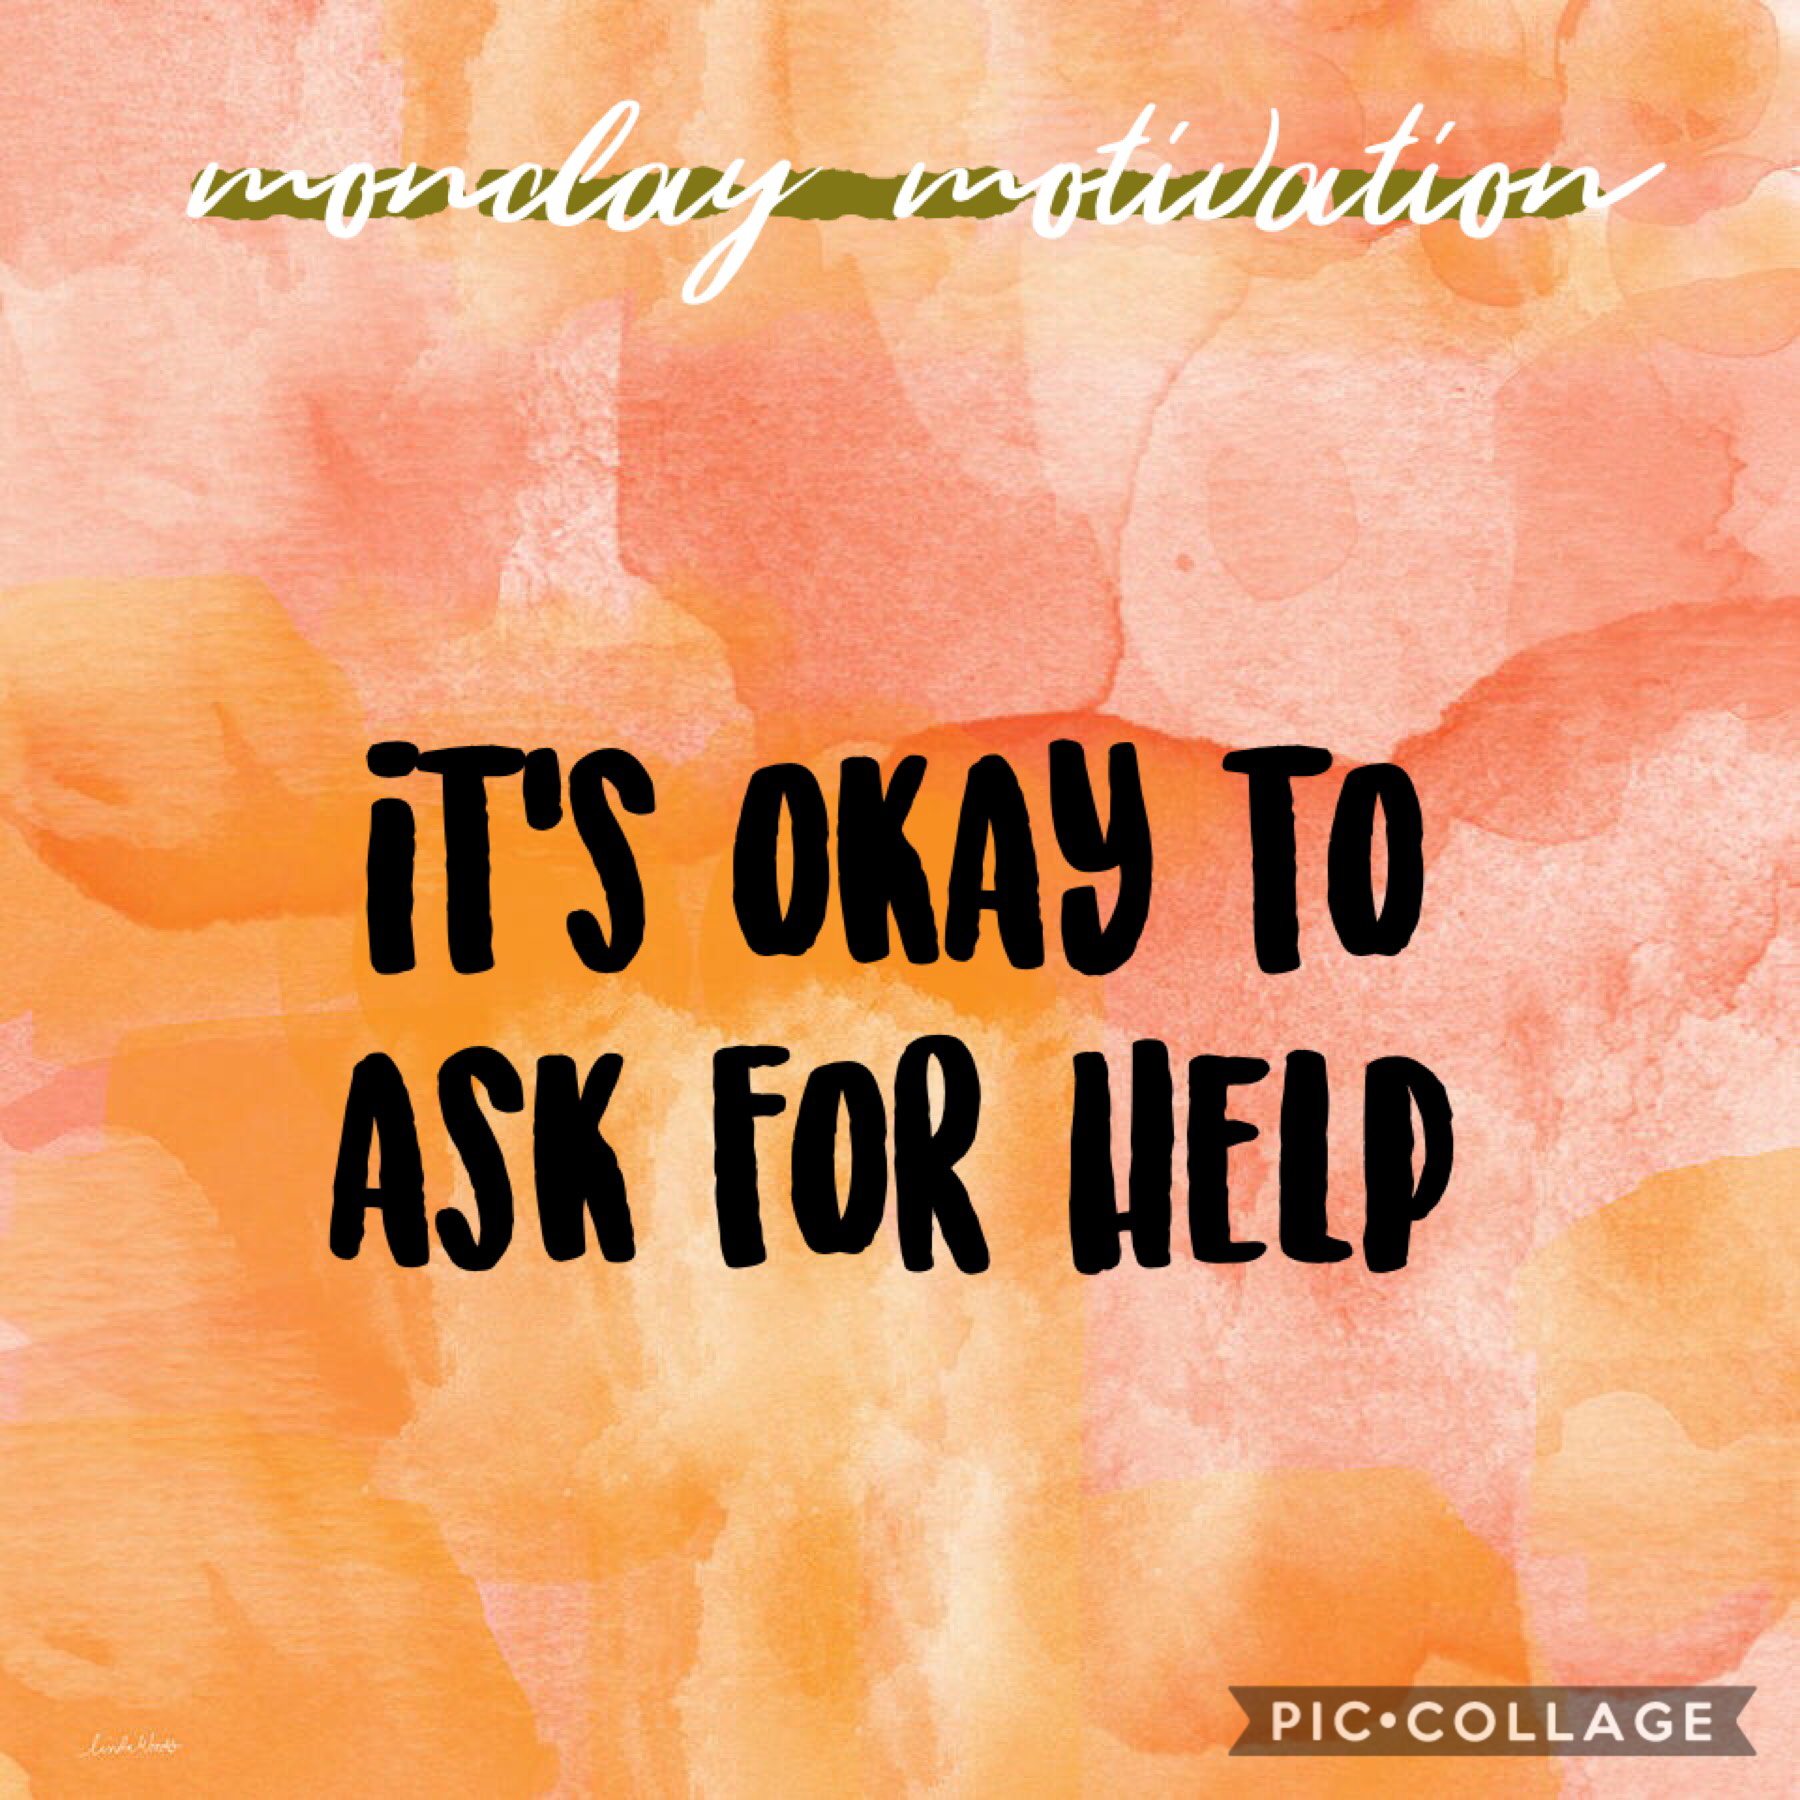 it’s simple. it’s okay to ask for help! it does not mean you are weak🧡✨i hope you all have a great week! this is my last week of school before winter break so i’m excited for that at least. Comment something you’re looking forward to soon!🍂
🧡Stay strong e